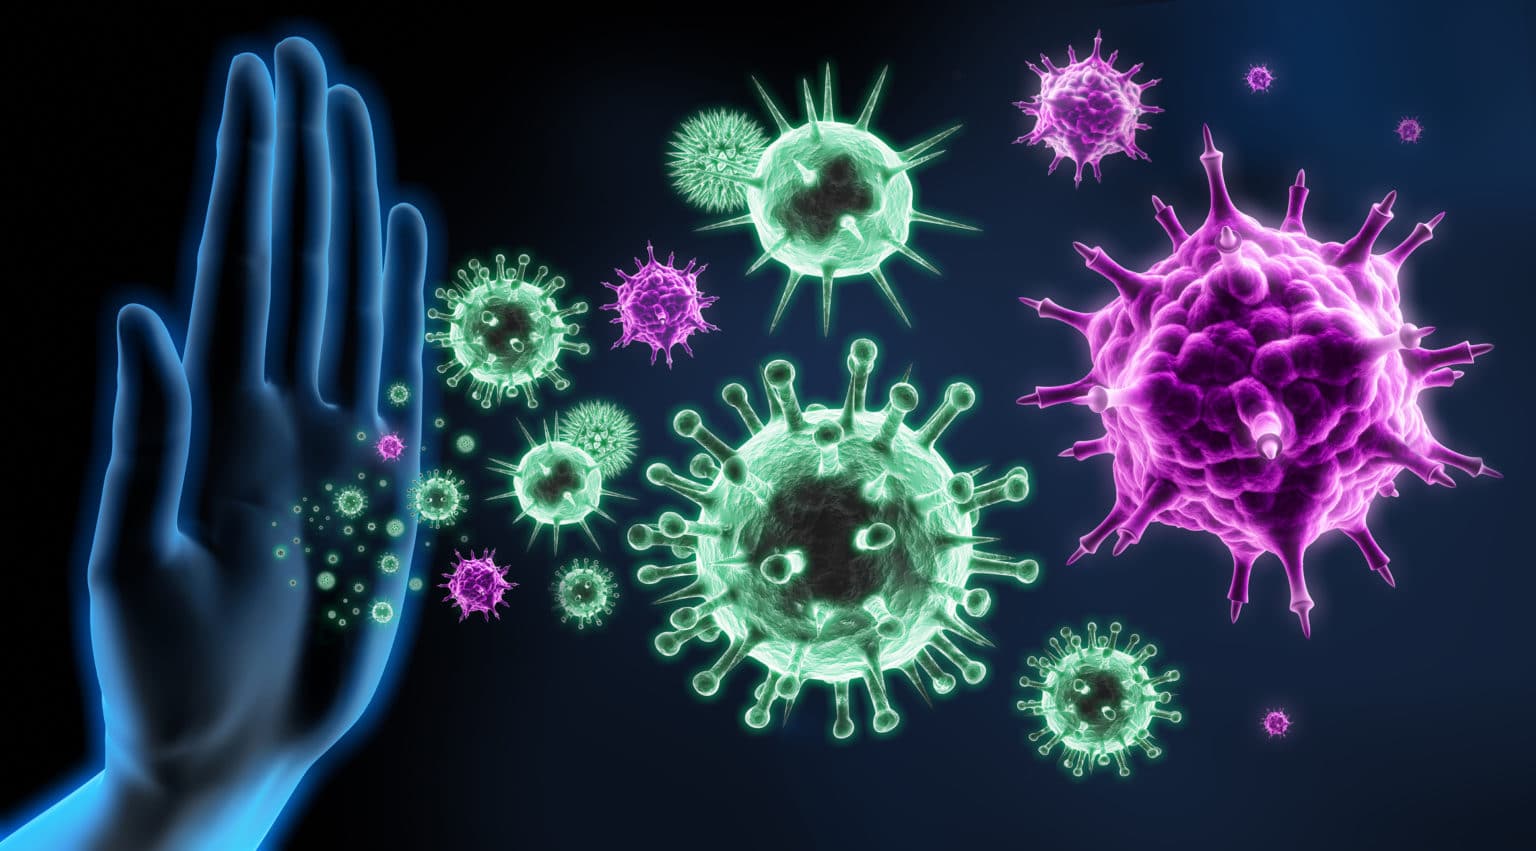 COVID-19 and Influenza: Similarities, Differences and the Upcoming Flu Season